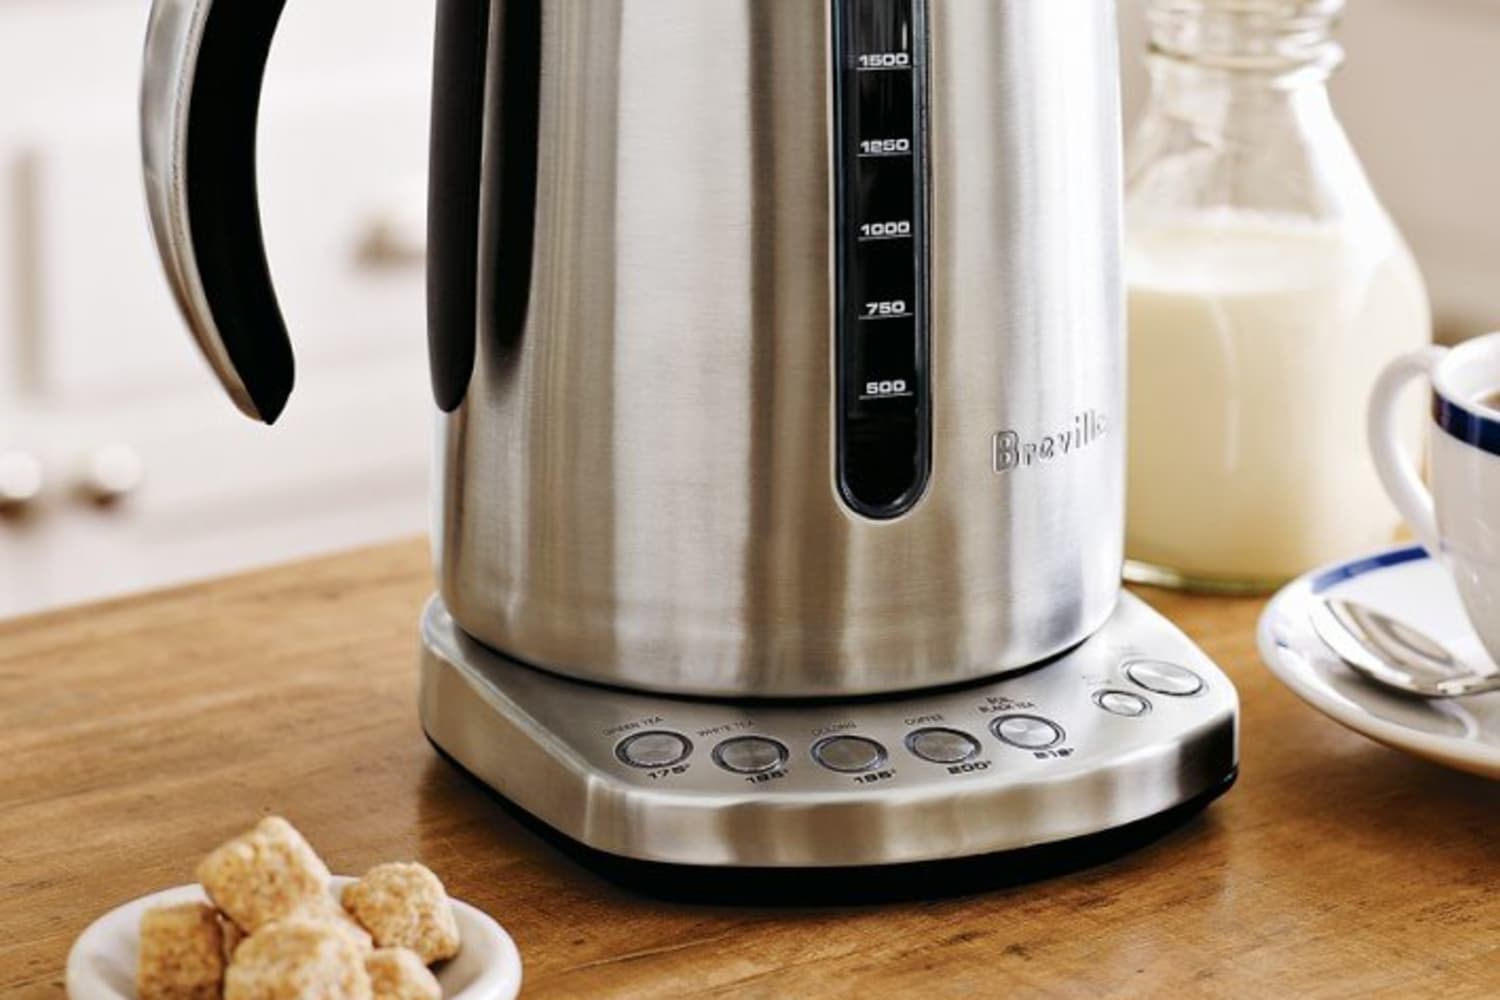 How does electric water kettle work